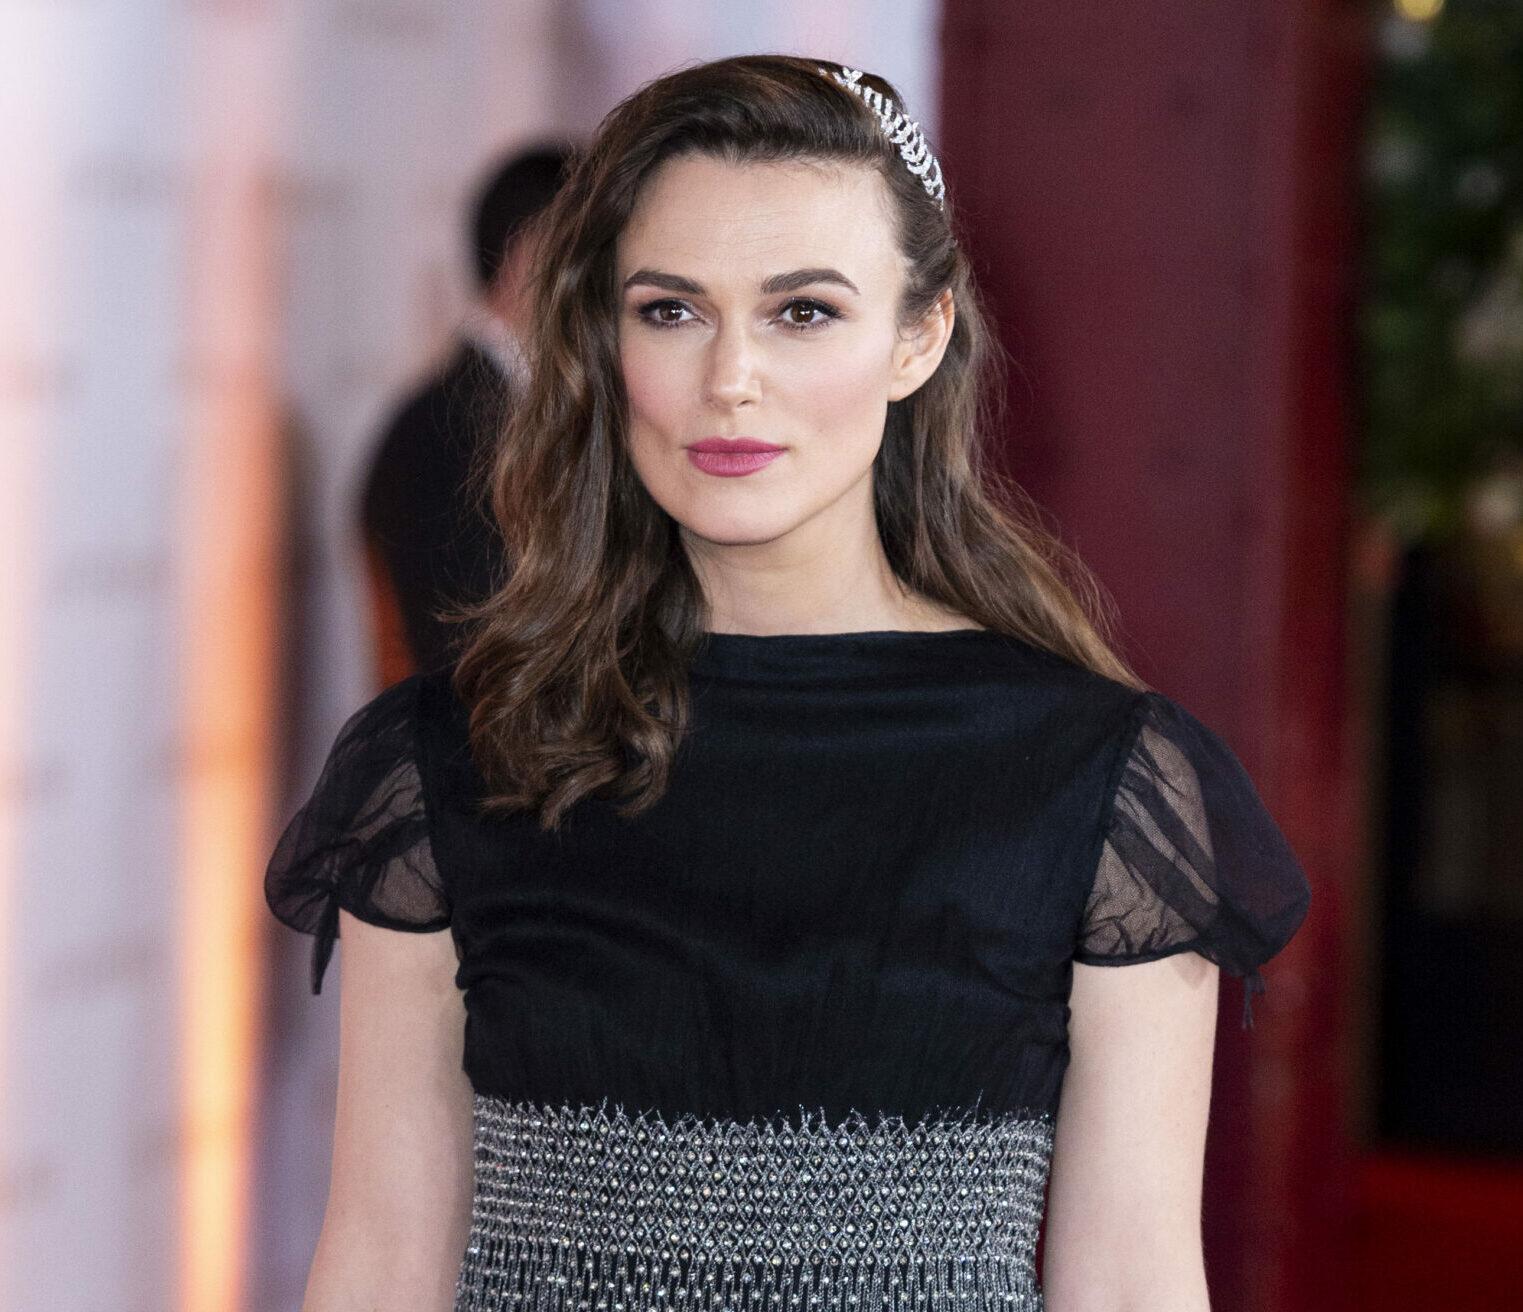 Keira Knightley At The Aftermath Film Premiere London